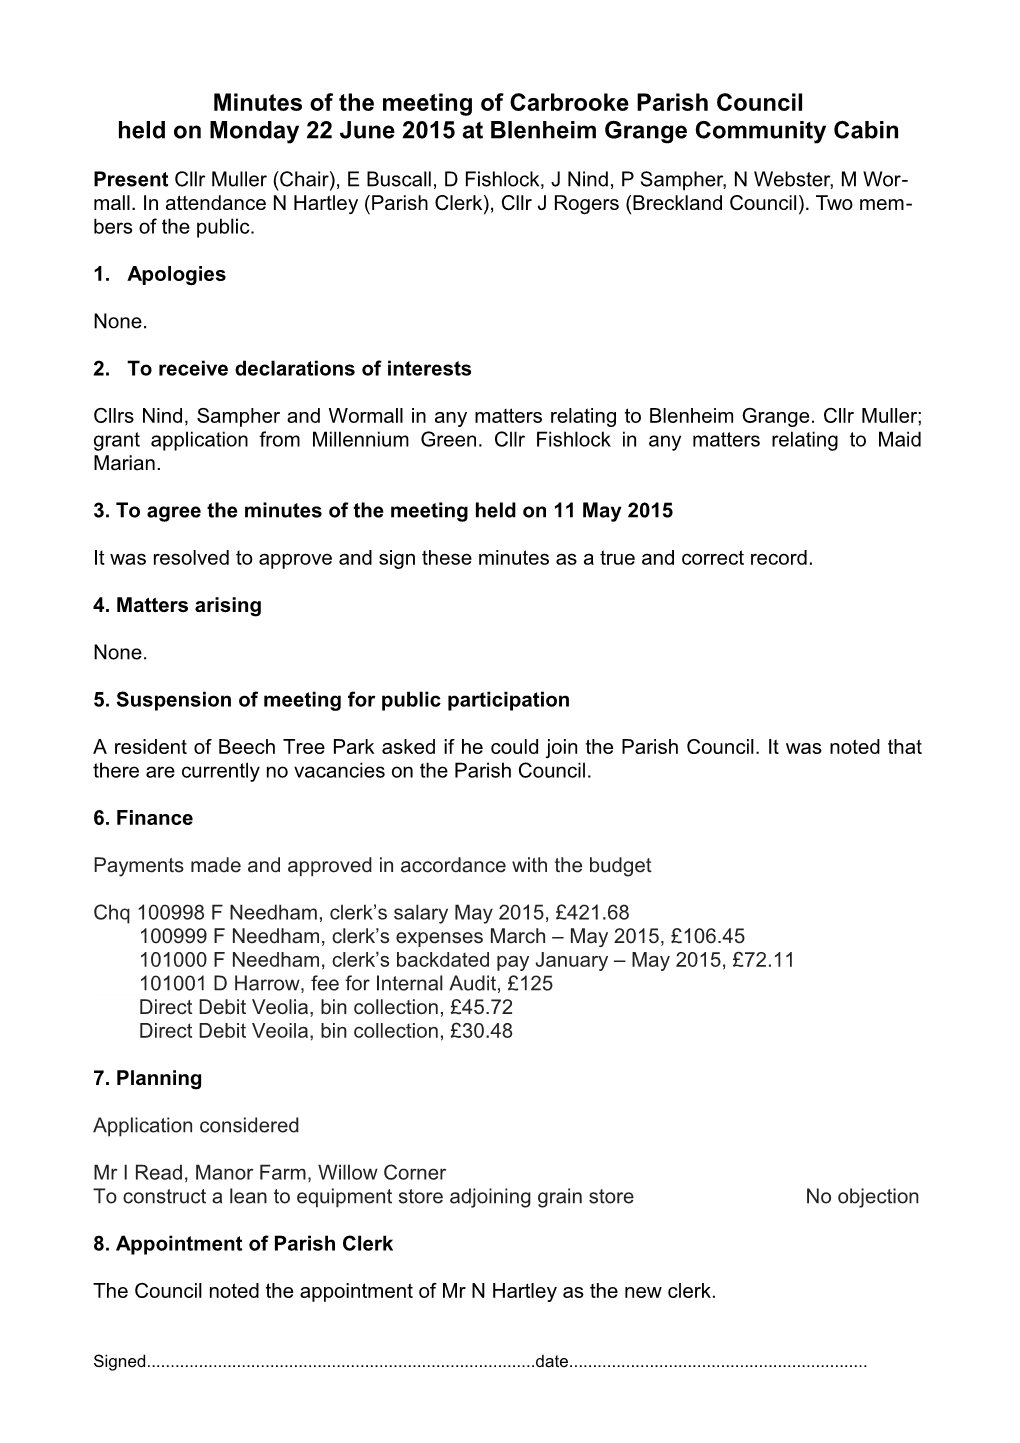 Minutes of the Meeting of Carbrooke Parish Council